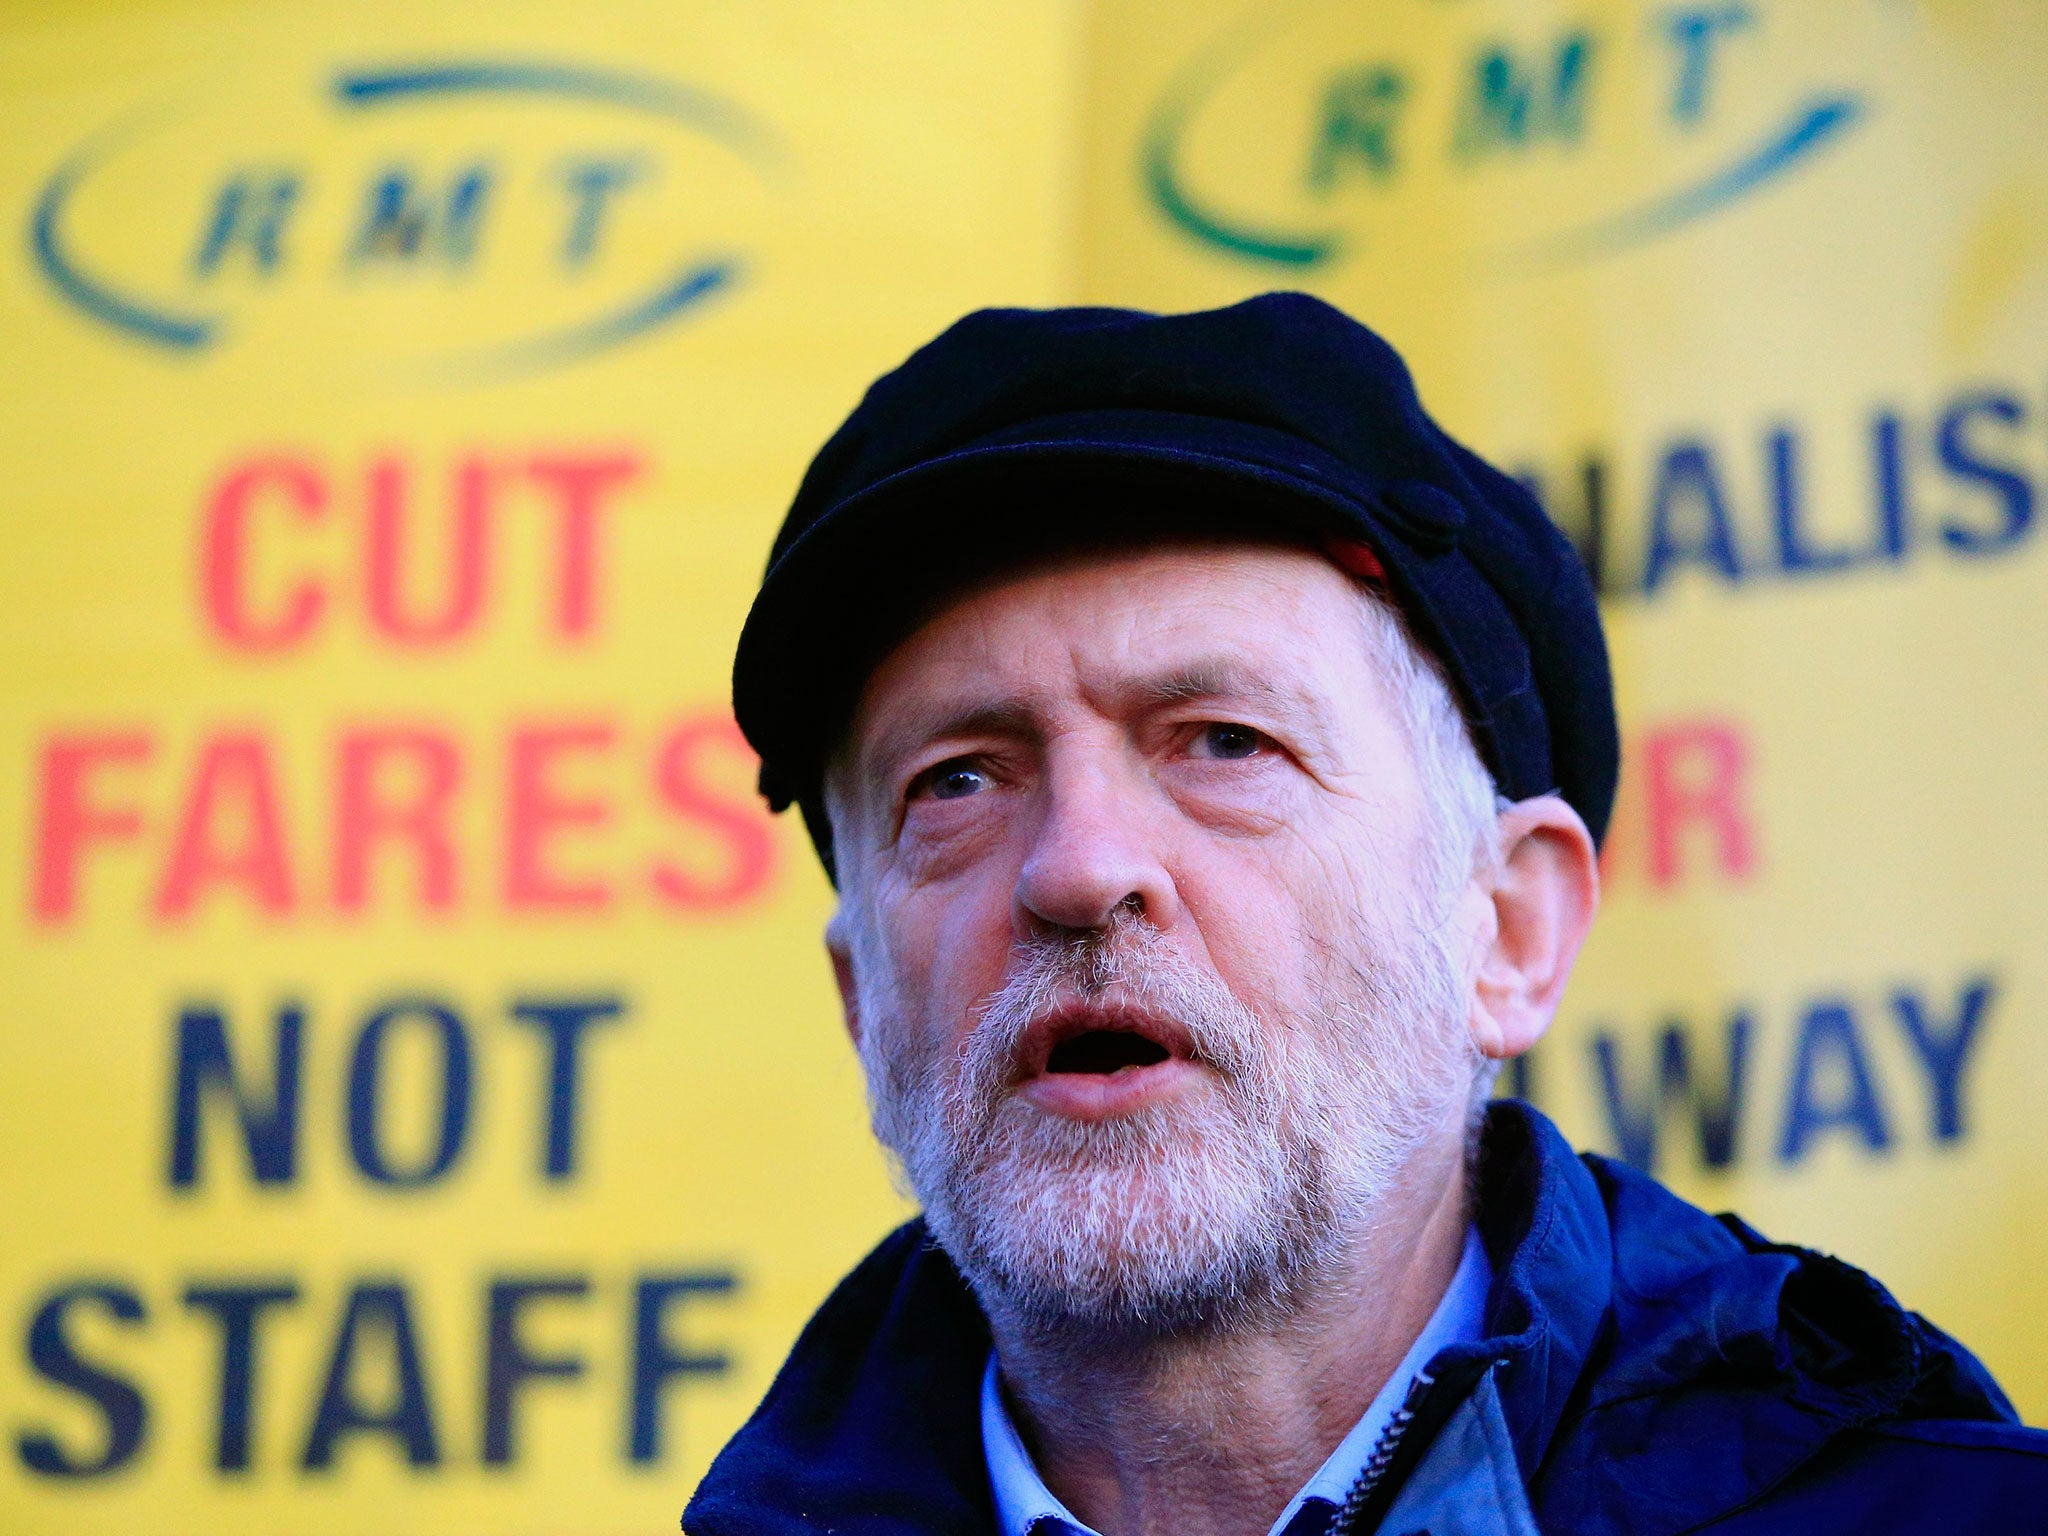 Jeremy Corbyn attends a protest against rises in rail fares in London last week